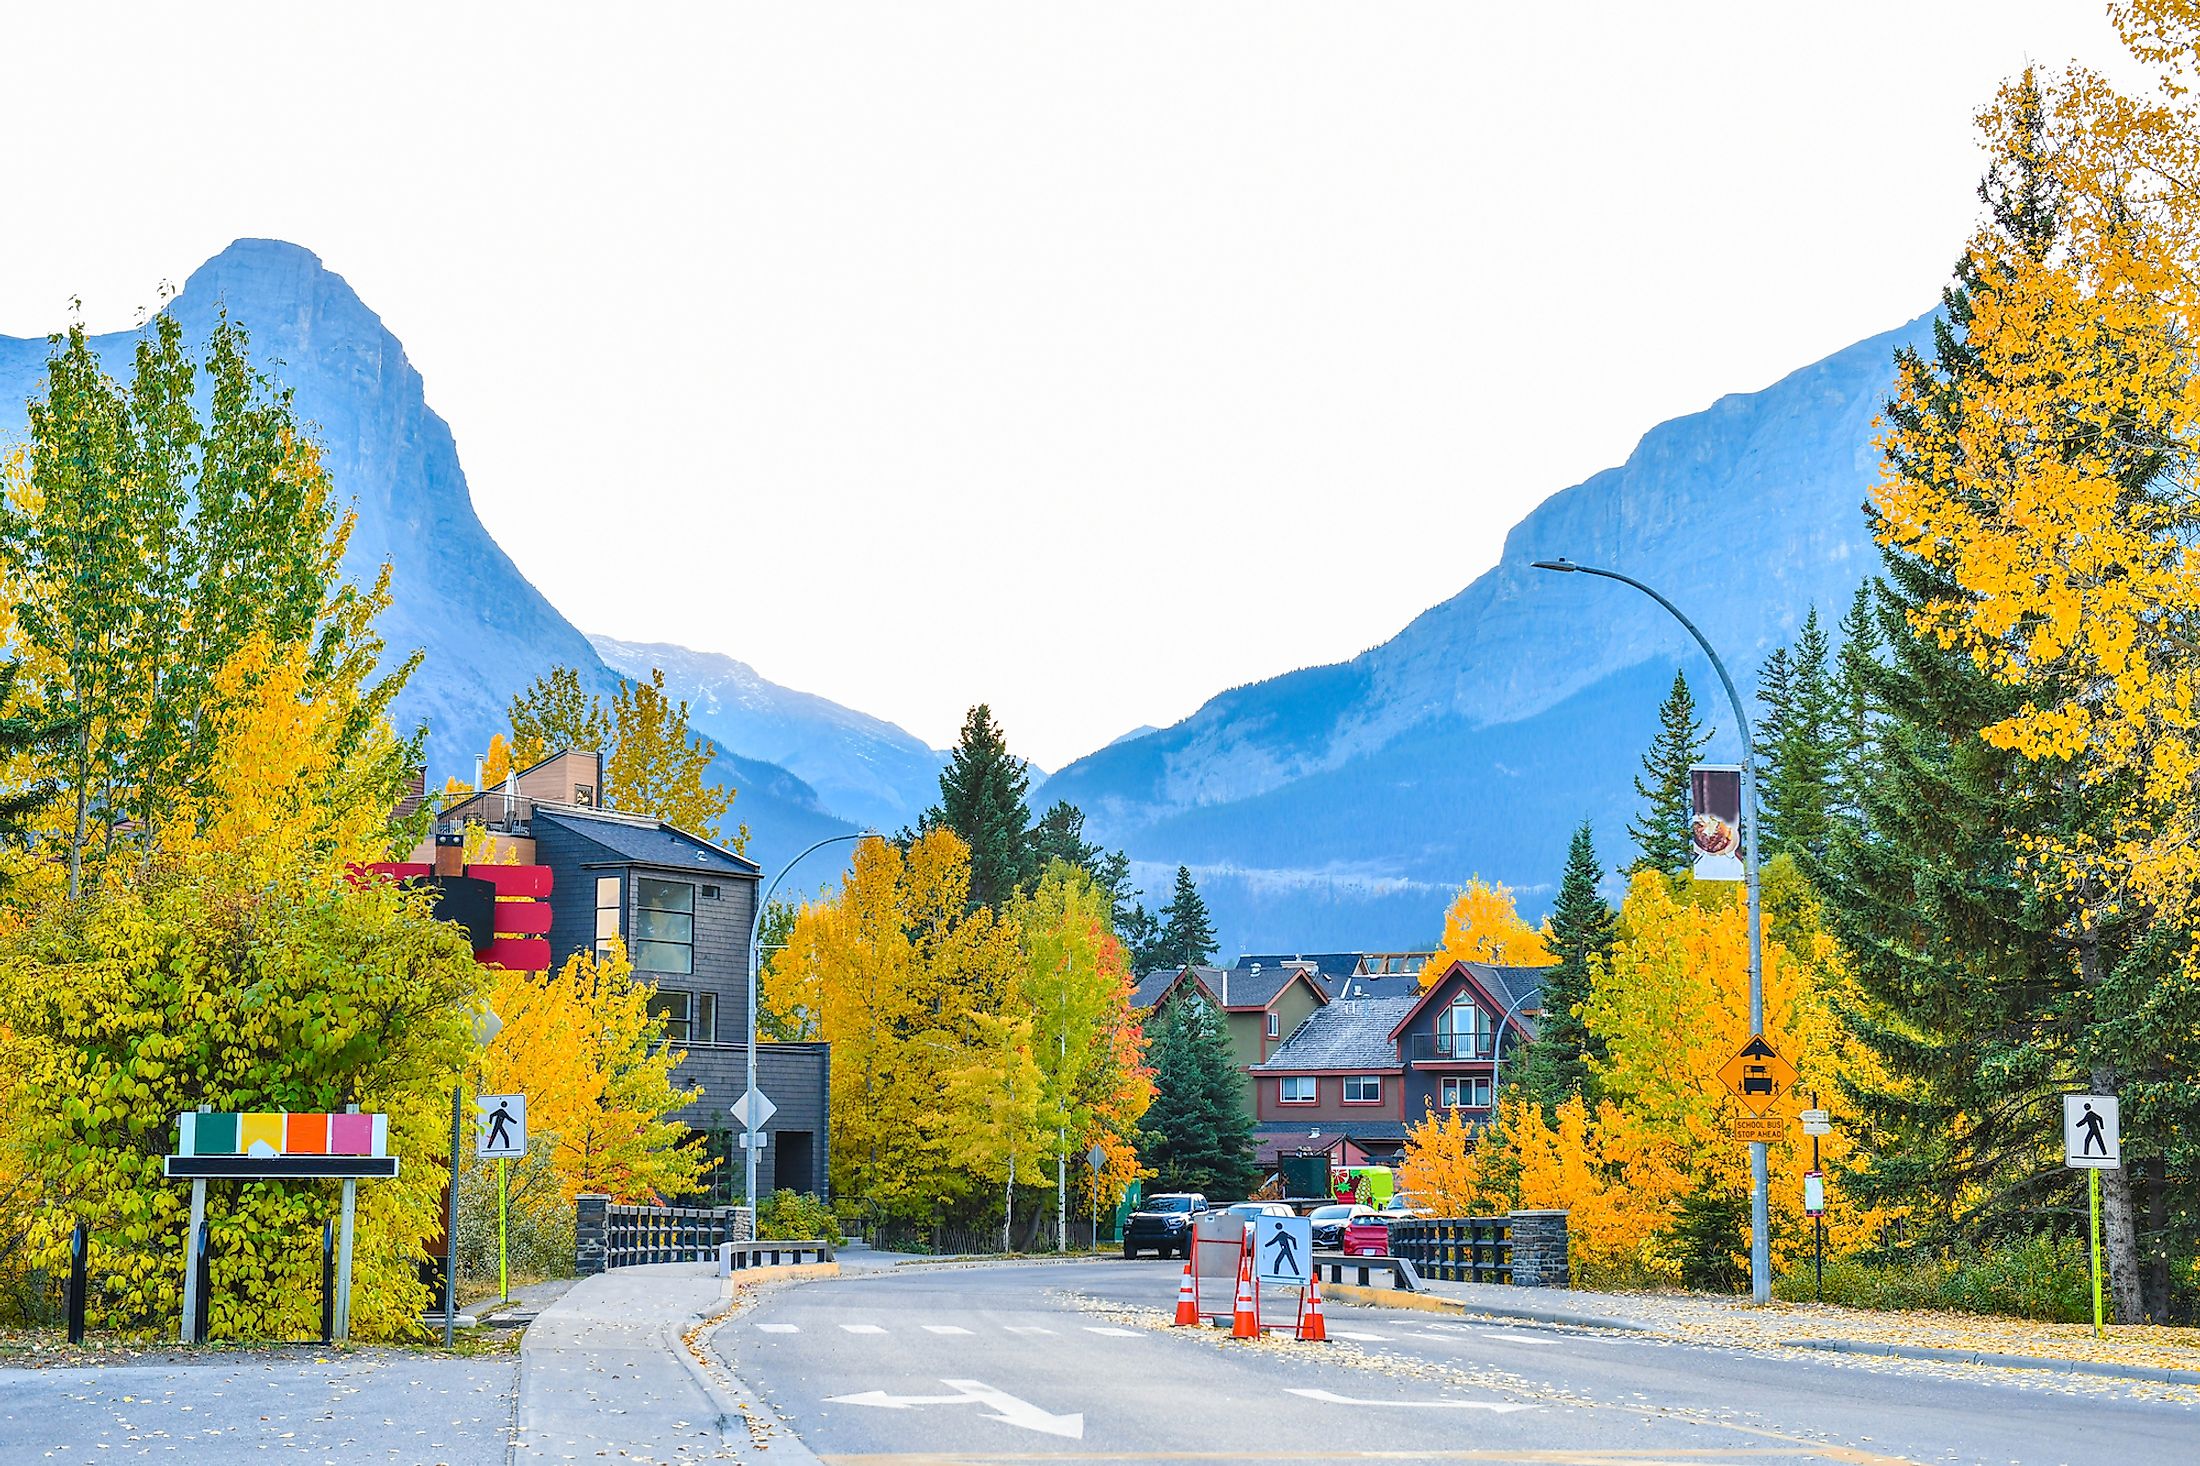 The streets of Canmore in canadian Rocky Mountains.